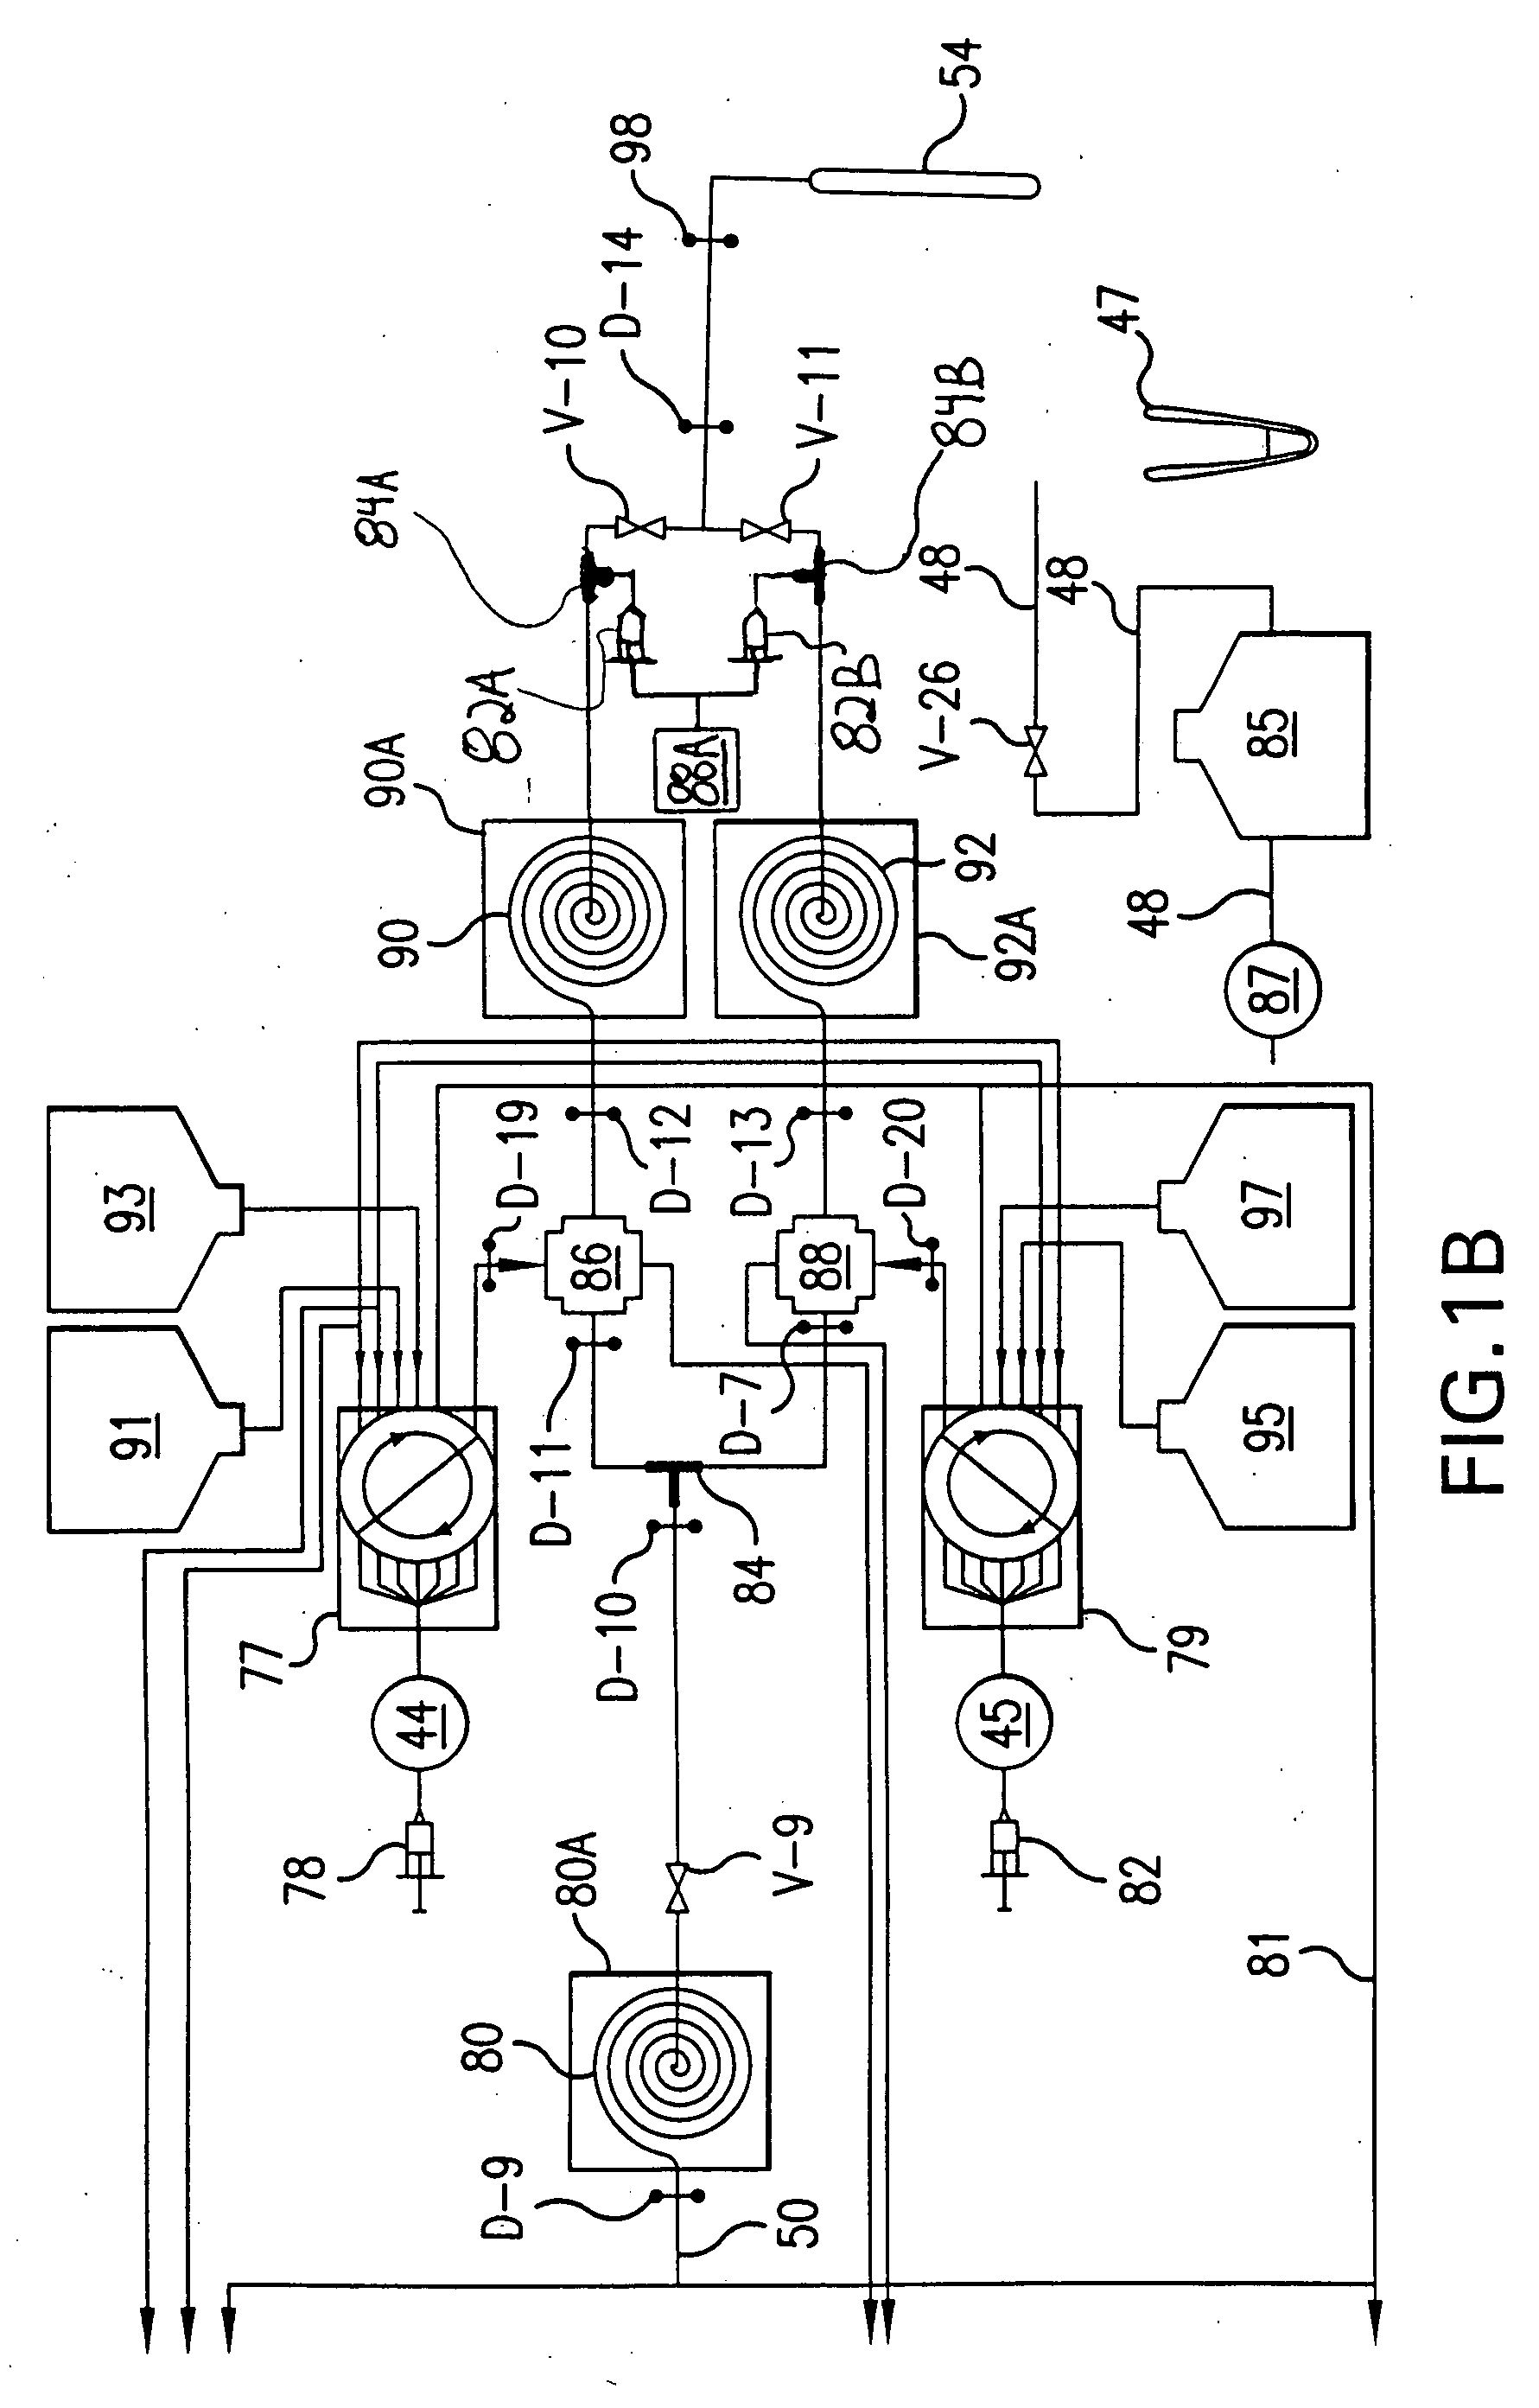 Device and method for making discrete volumes of a first fluid in contact with a second fluid, which are immiscible with each other